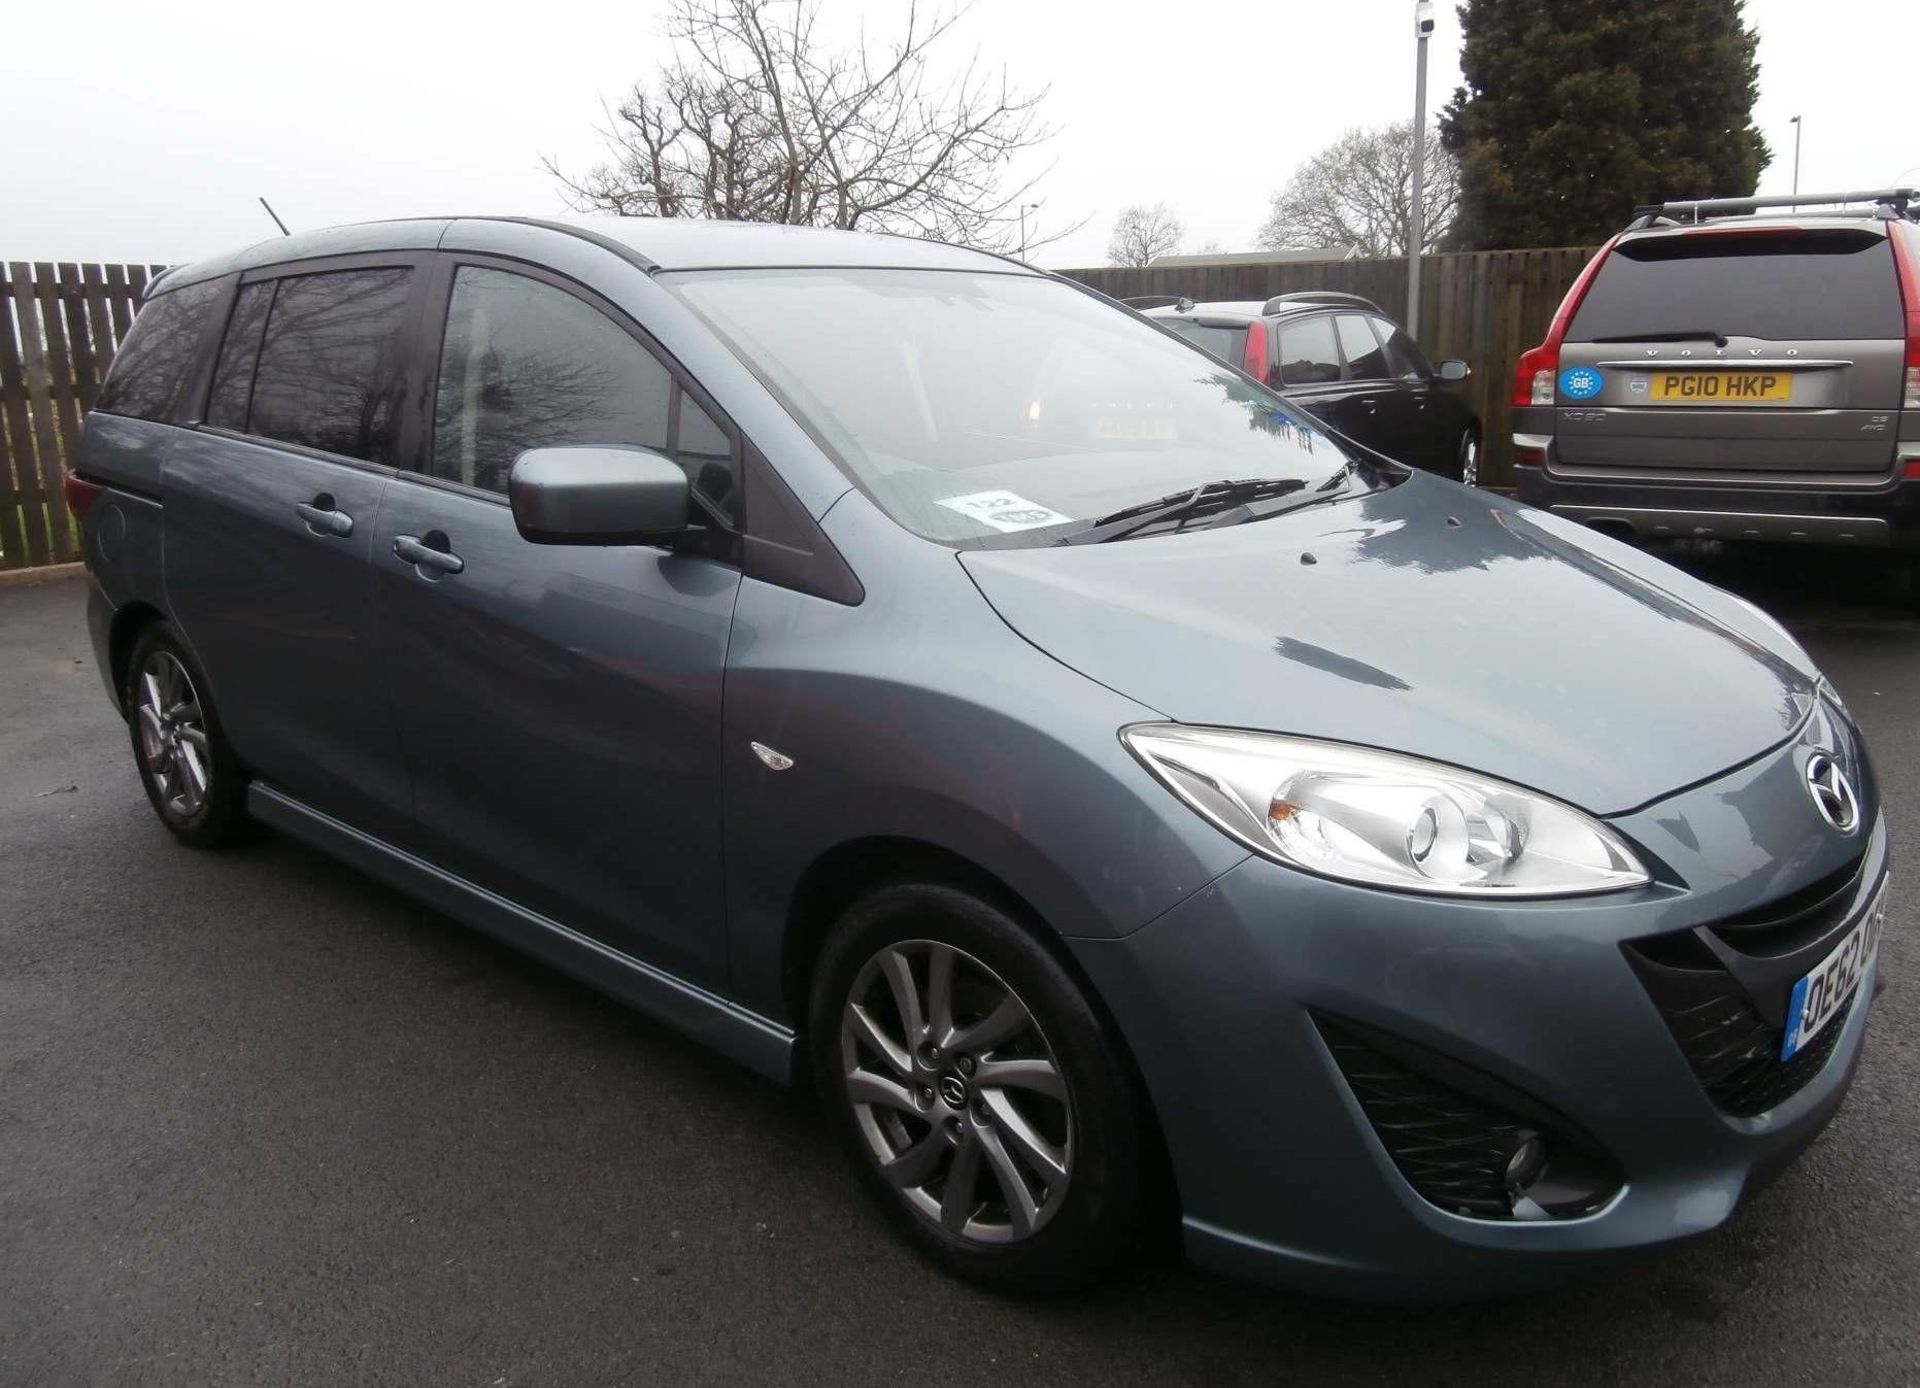 2013 Mazda 5 2.0 Venture Edition 5 Dr MPV - CL505 - NO VAT ON THE HAMMER - Location: Corby, N - Image 5 of 18